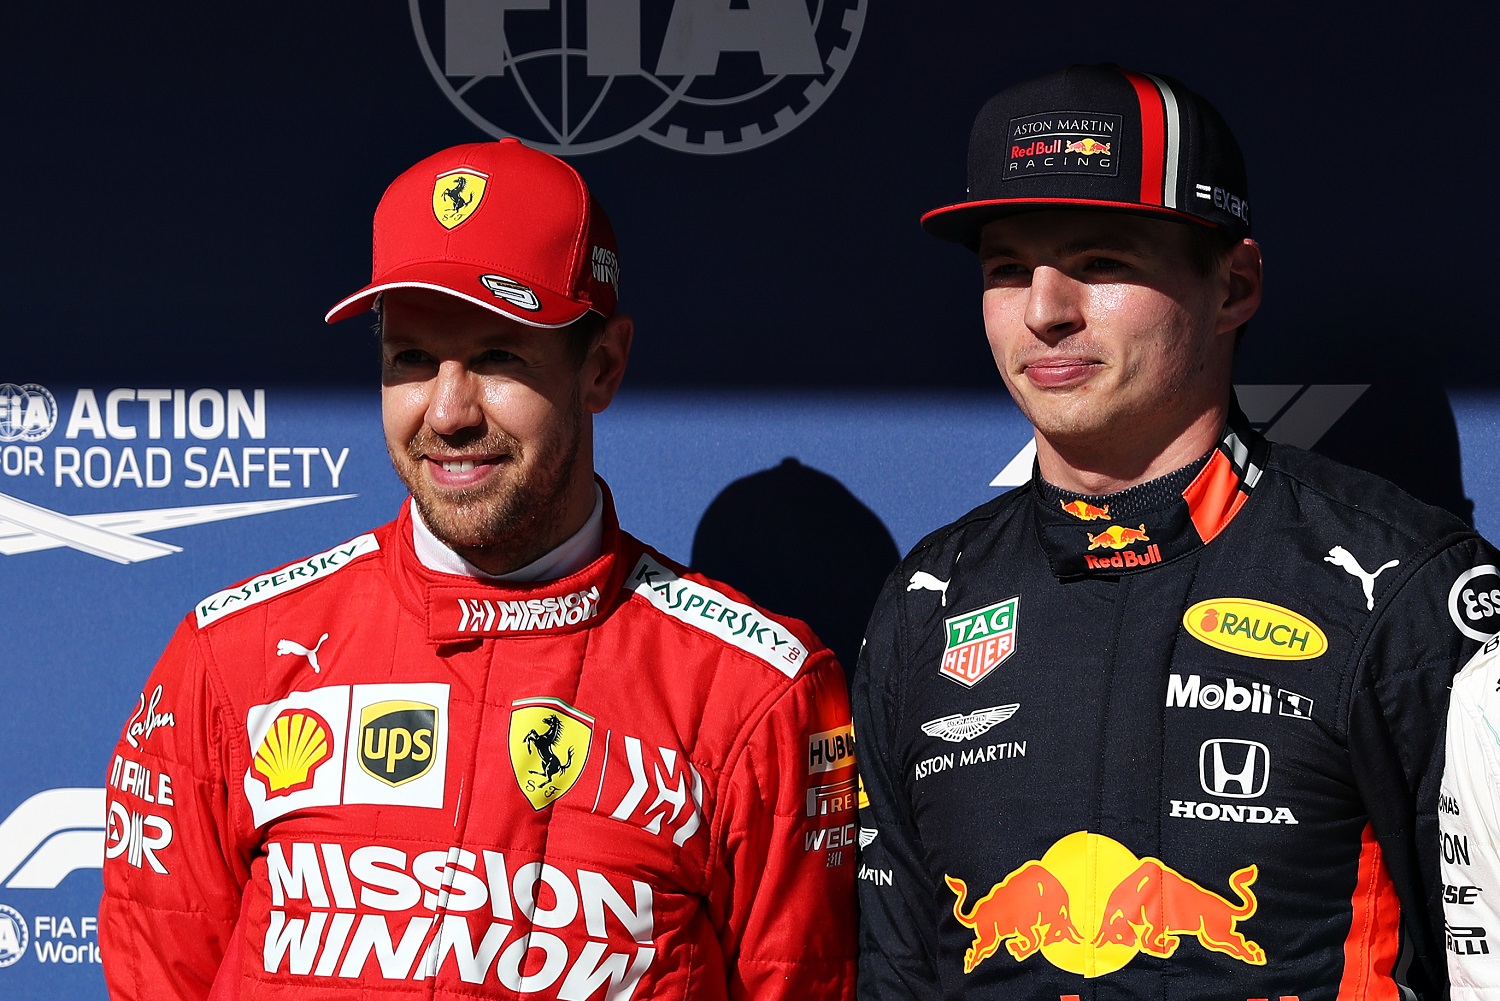 Max Verstappen of the Netherlands and Sebastian Vettel of Germany pose in parc ferme after qualifying for the Formula 1 Grand Prix of Brazil at Autodromo Jose Carlos Pace on Nov. 16, 2019, in Sao Paulo, Brazil.